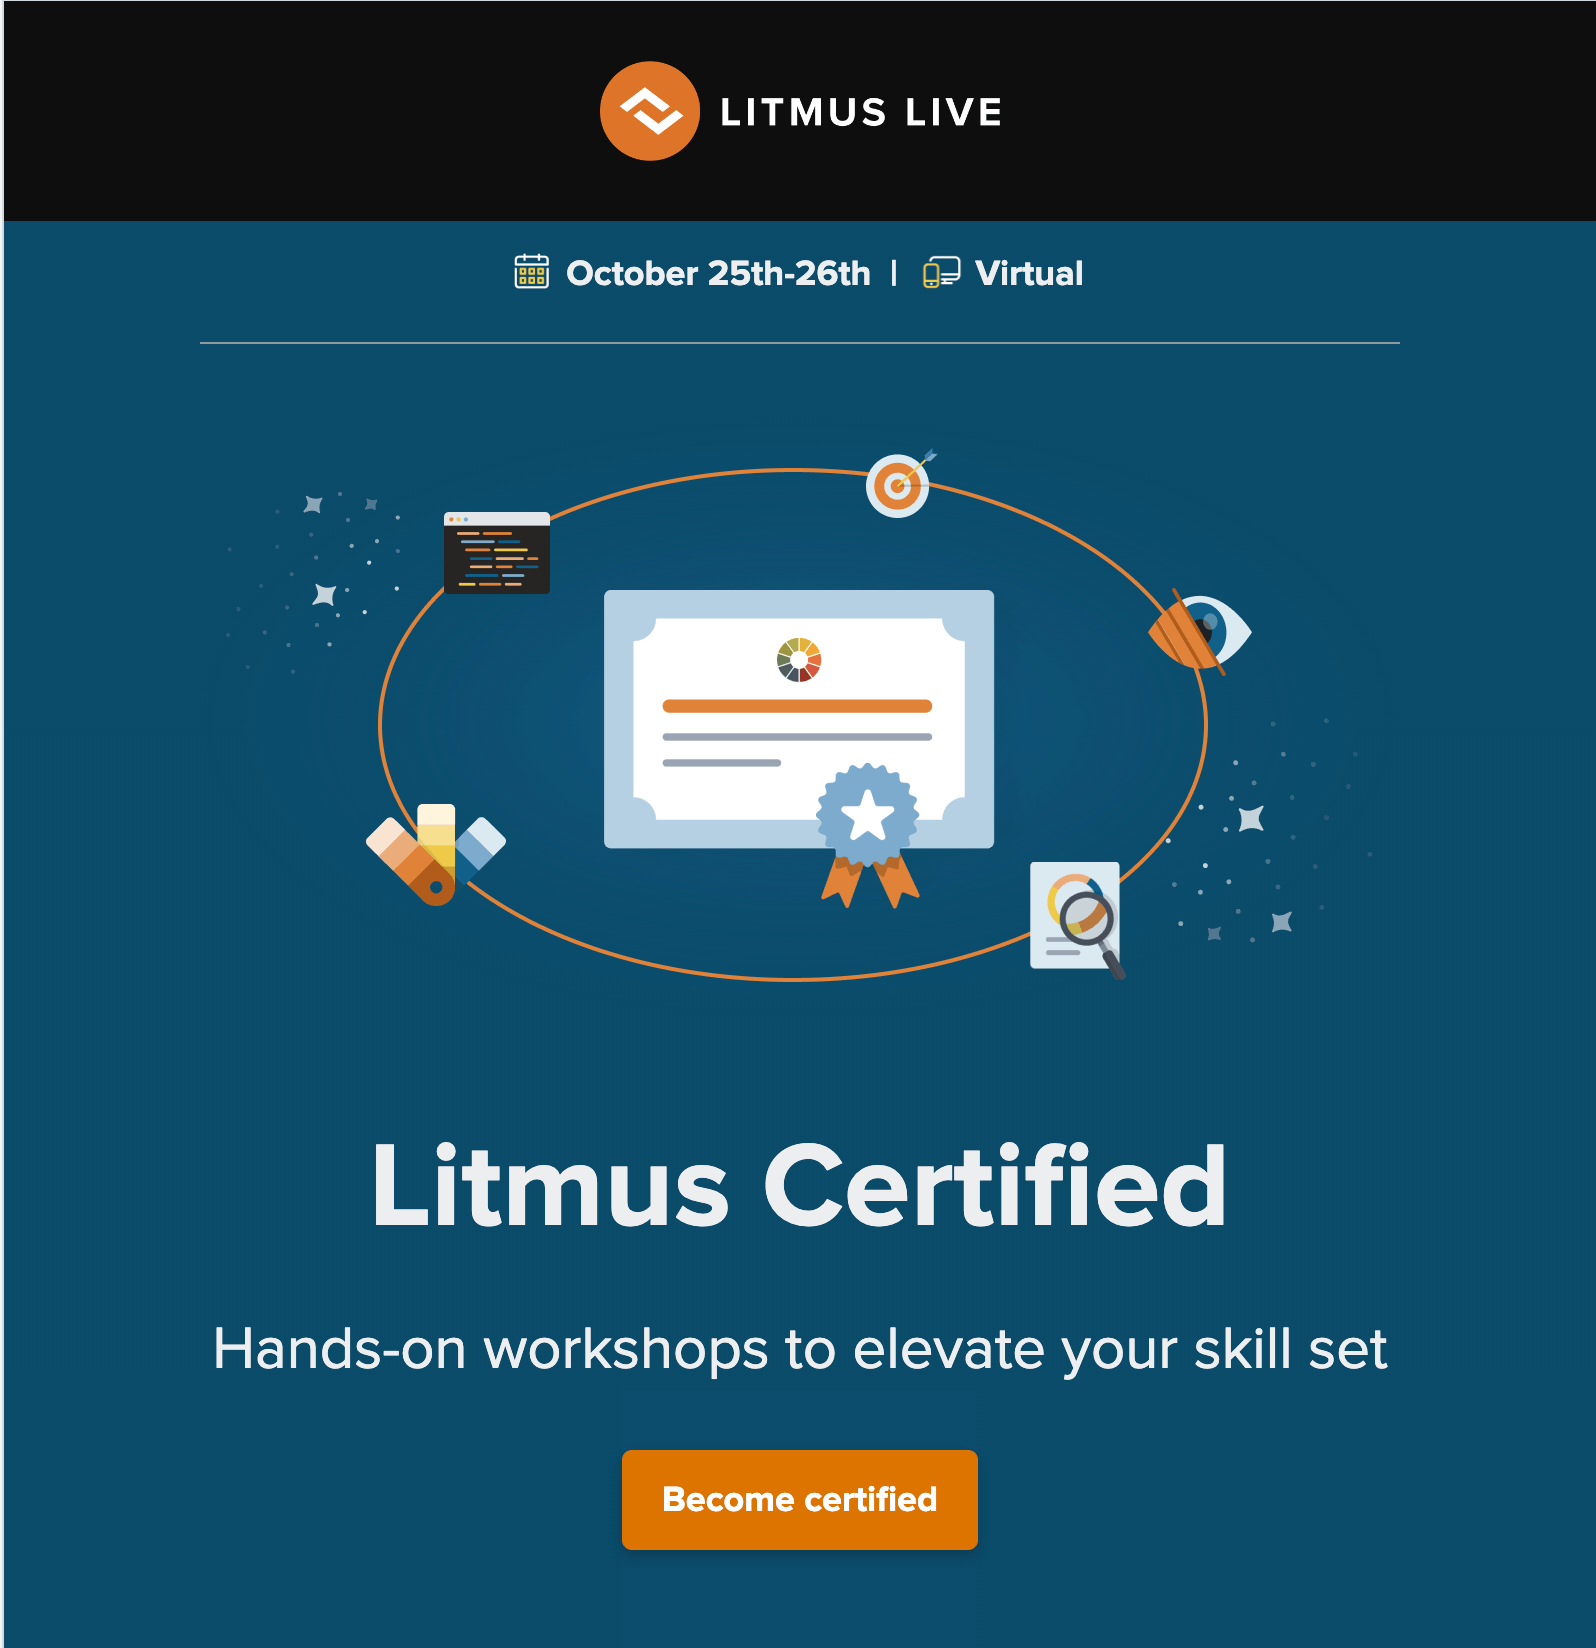 An email inviting subscribers to become Litmus Certified